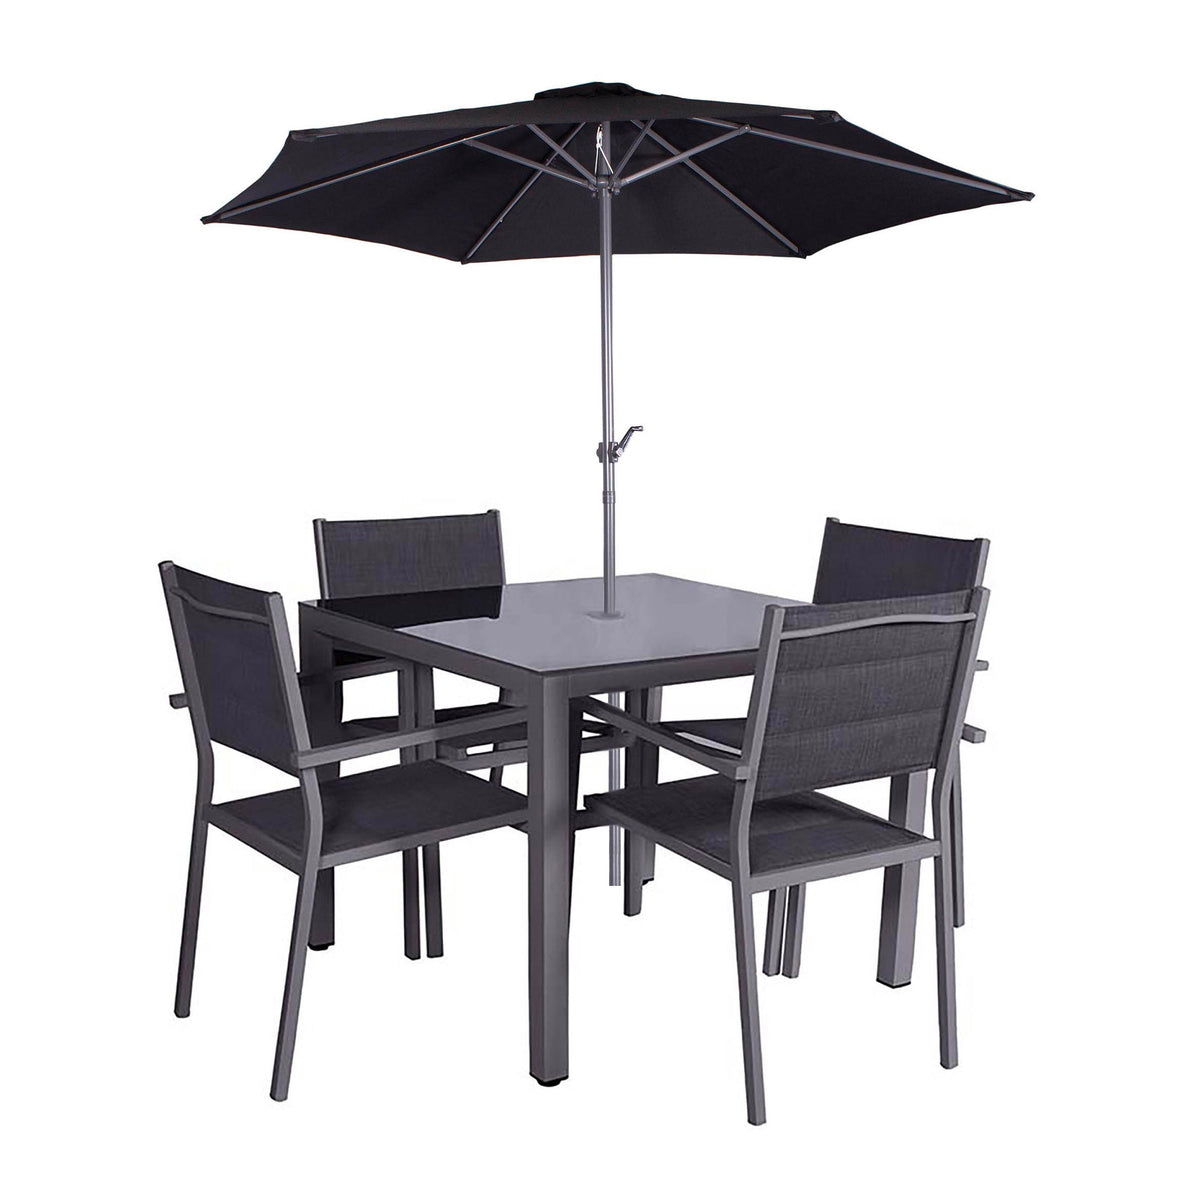 Sorrento 4 Seater Garden Dining Table Set with Parasol by Roseland Furniture